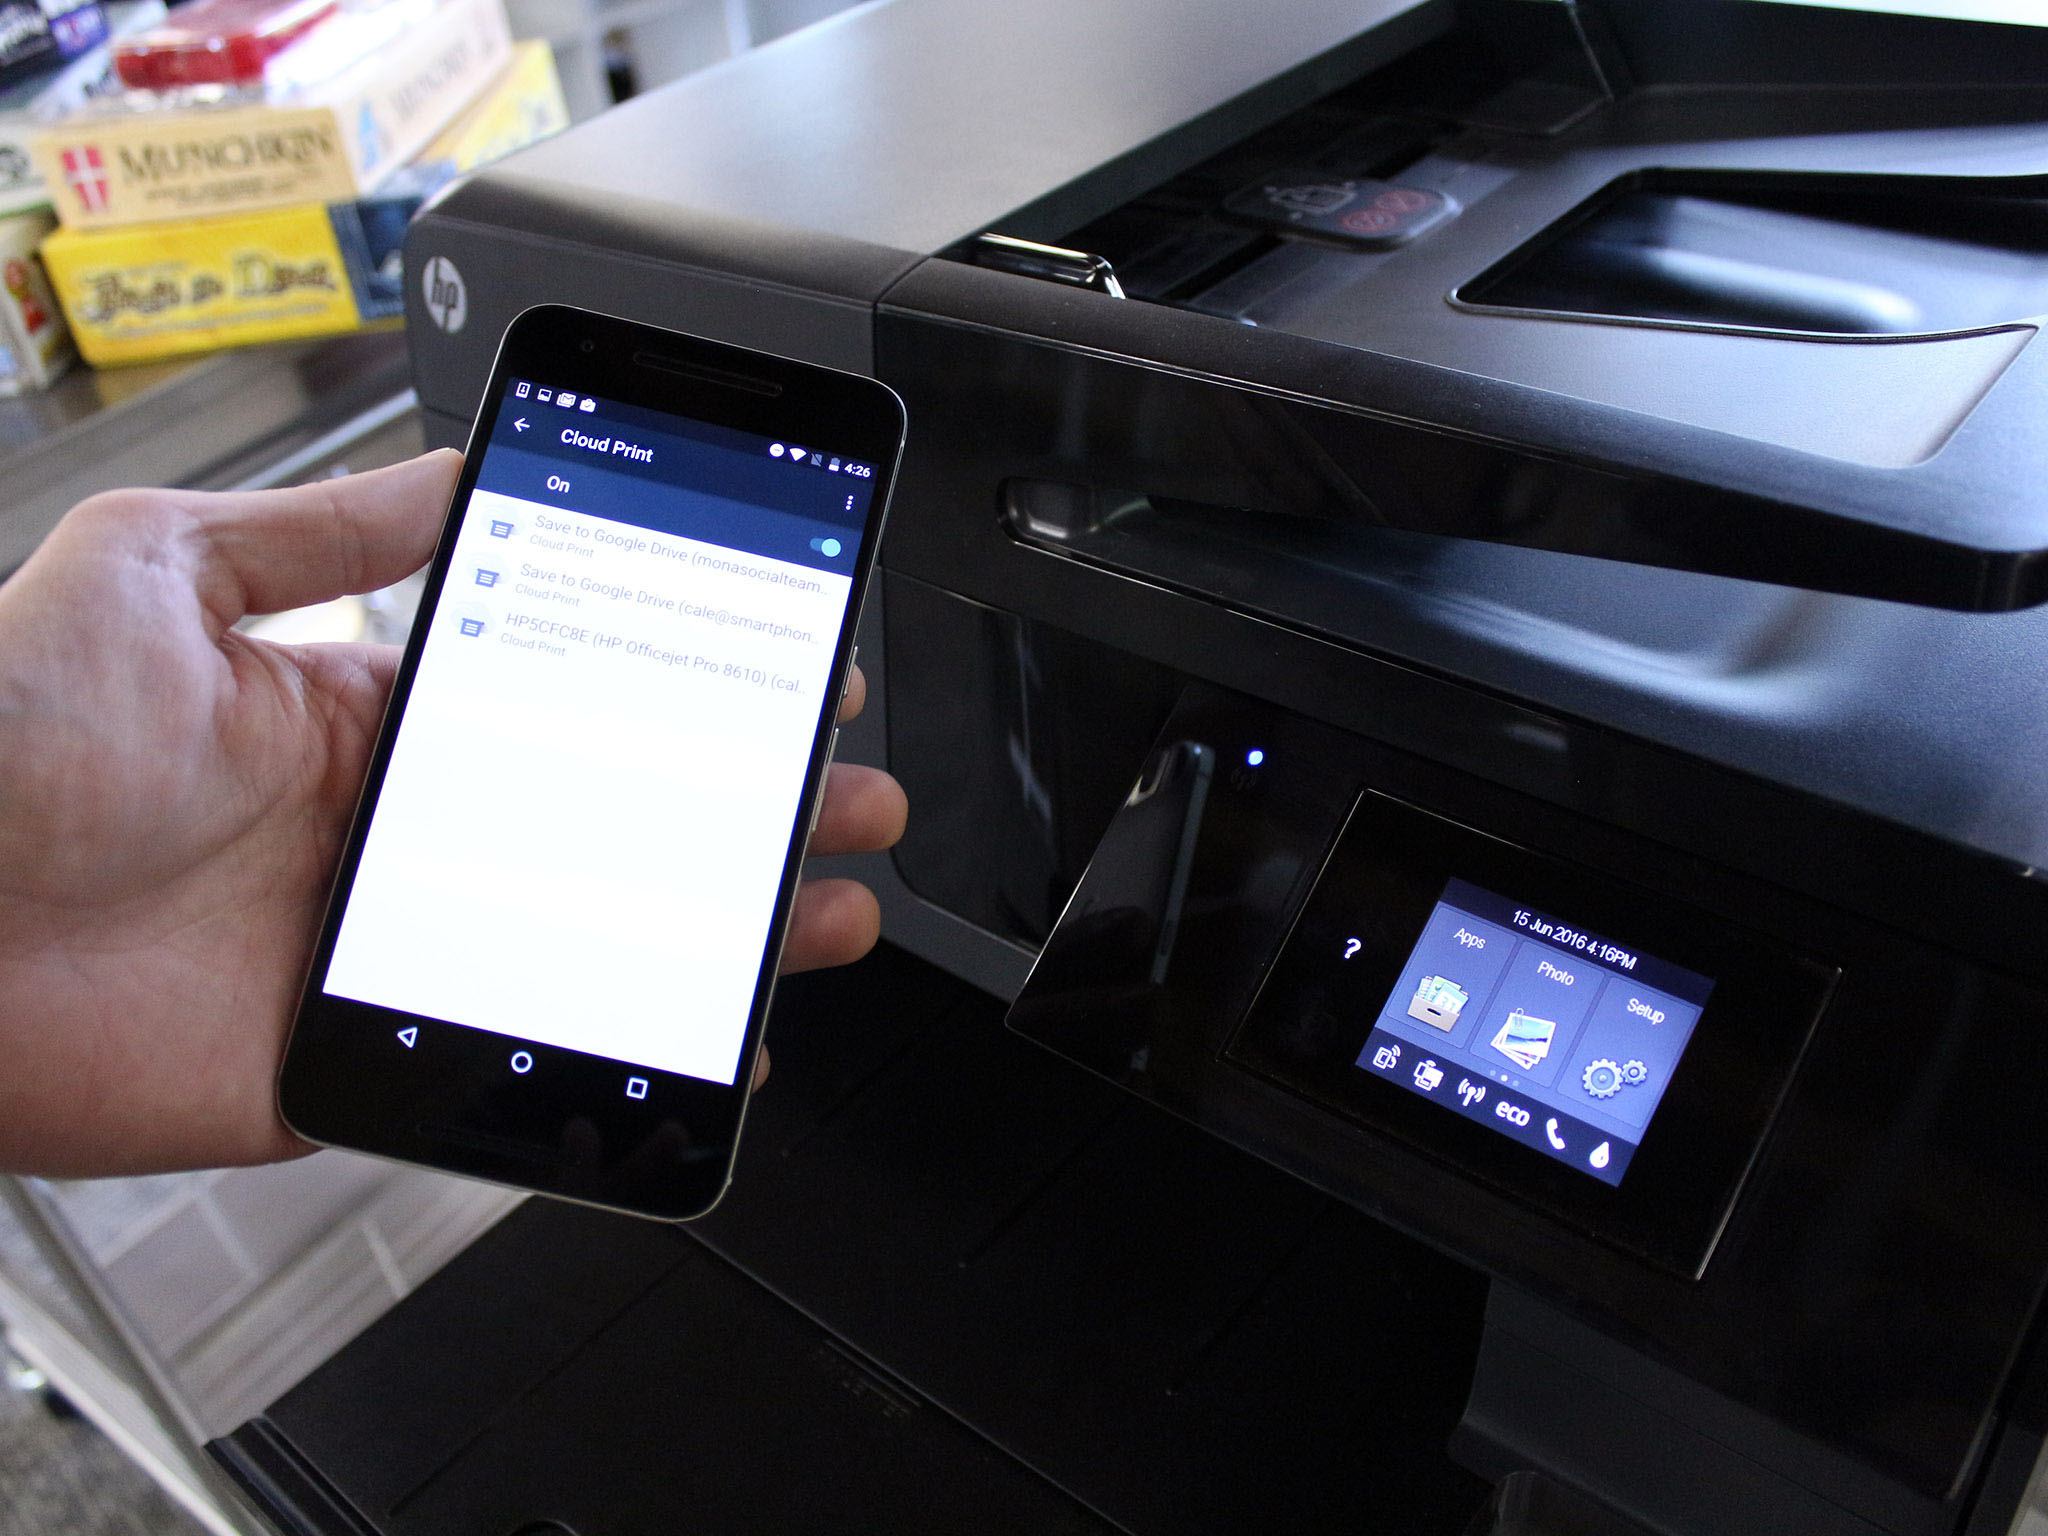 How do you print documents by using your Wi-Fi?